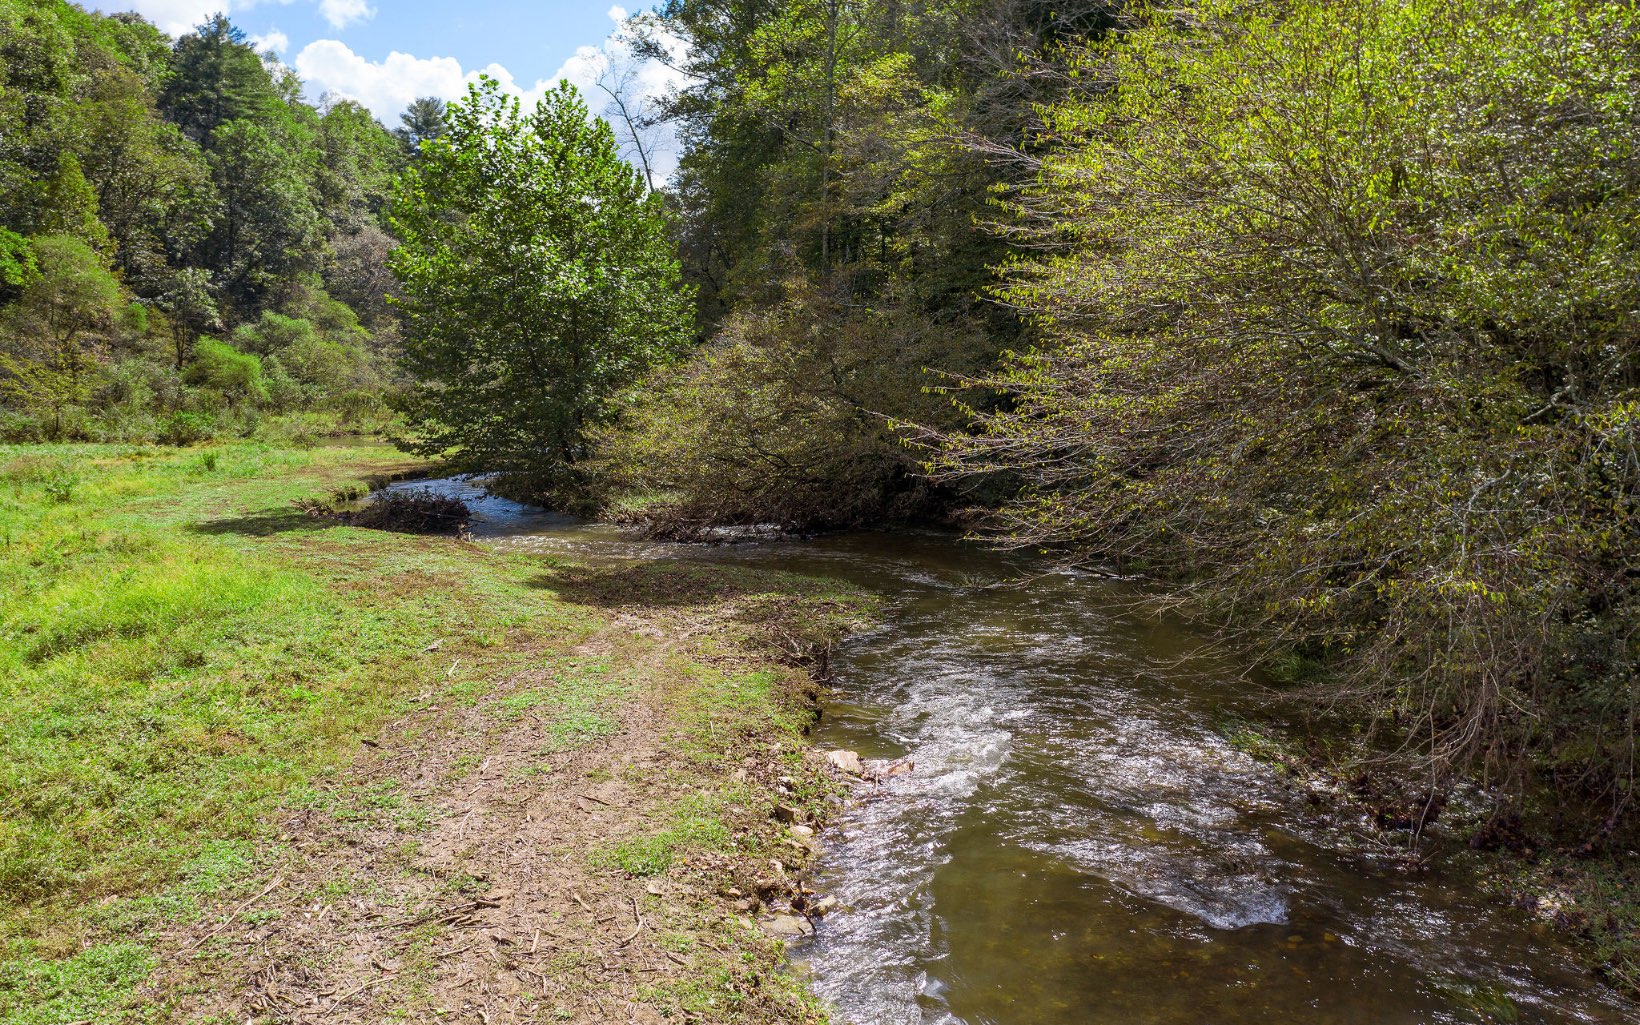 78.54 +/- Acres with Conasauga Creek frontage. Build your mountain retreat here. This property is entirely wooded with mature timber. Utilities: Power. 1221.9’ road frontage.